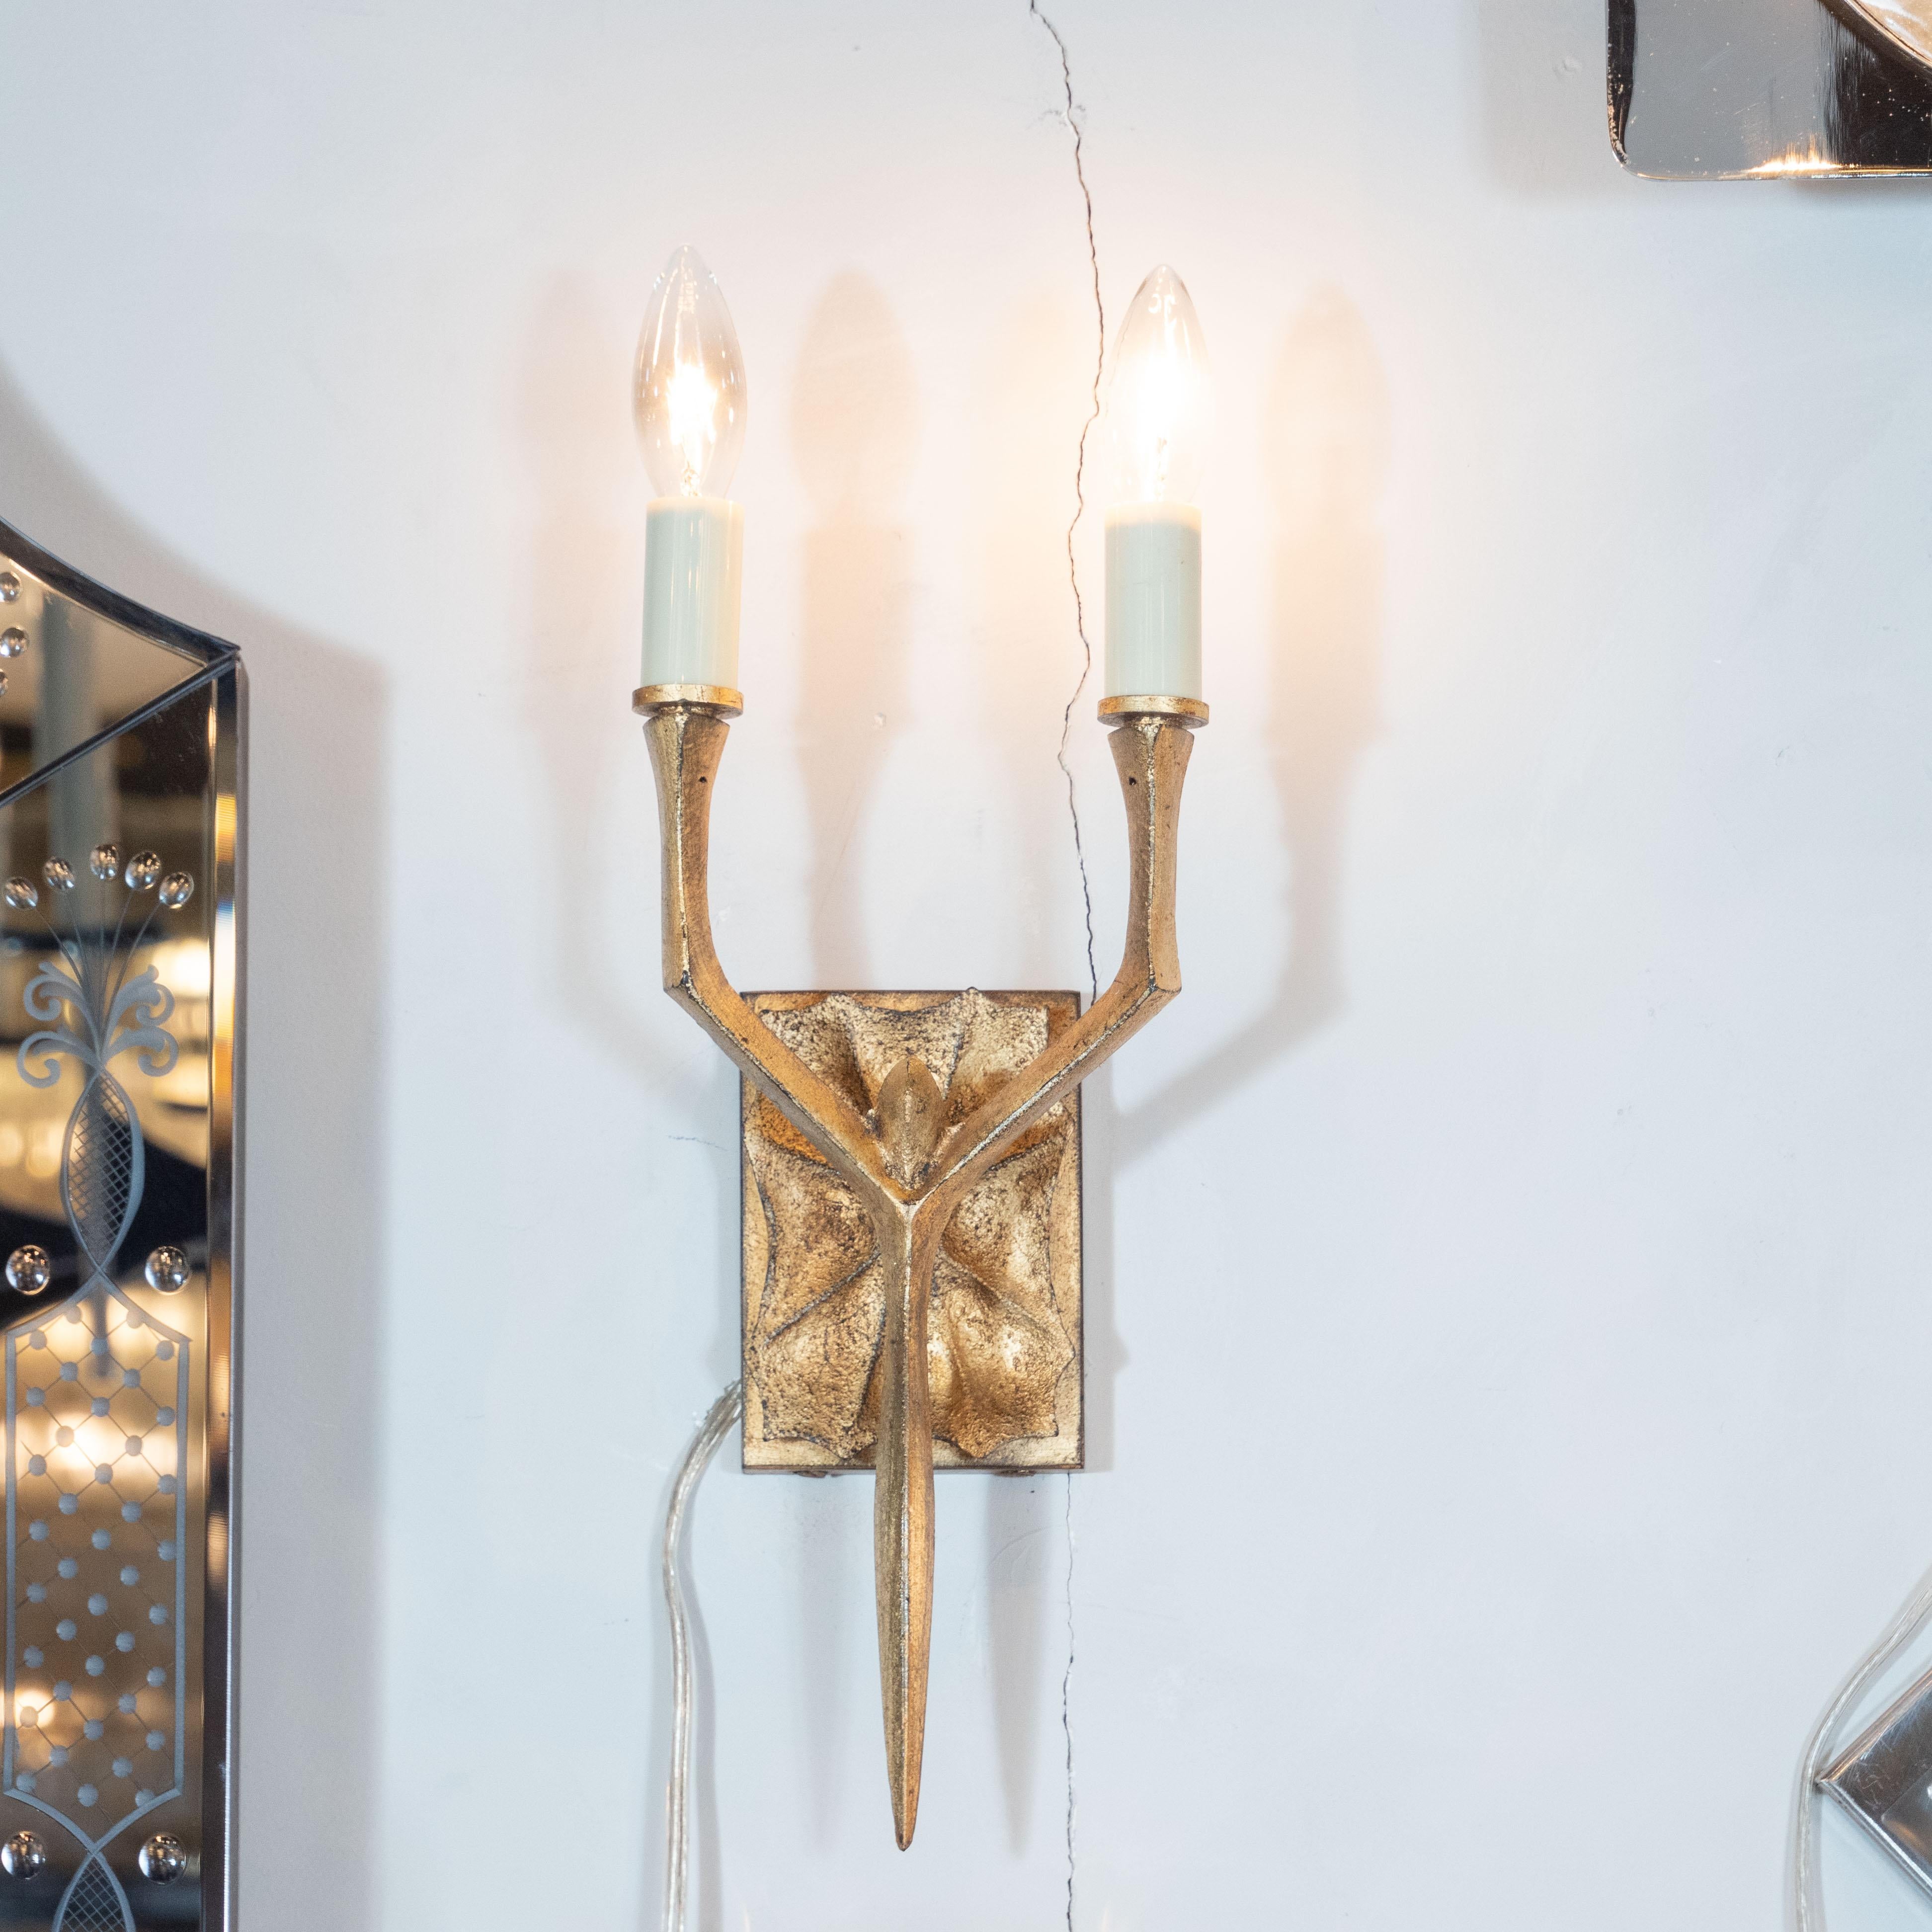 This dramatic and elegant pair of modernist brutalist branch sconces feature two arms; a rectangular backplate with a hand carved texture; and two arms resembling tree branches that meet in the center and converge to a single point. The 24-karat